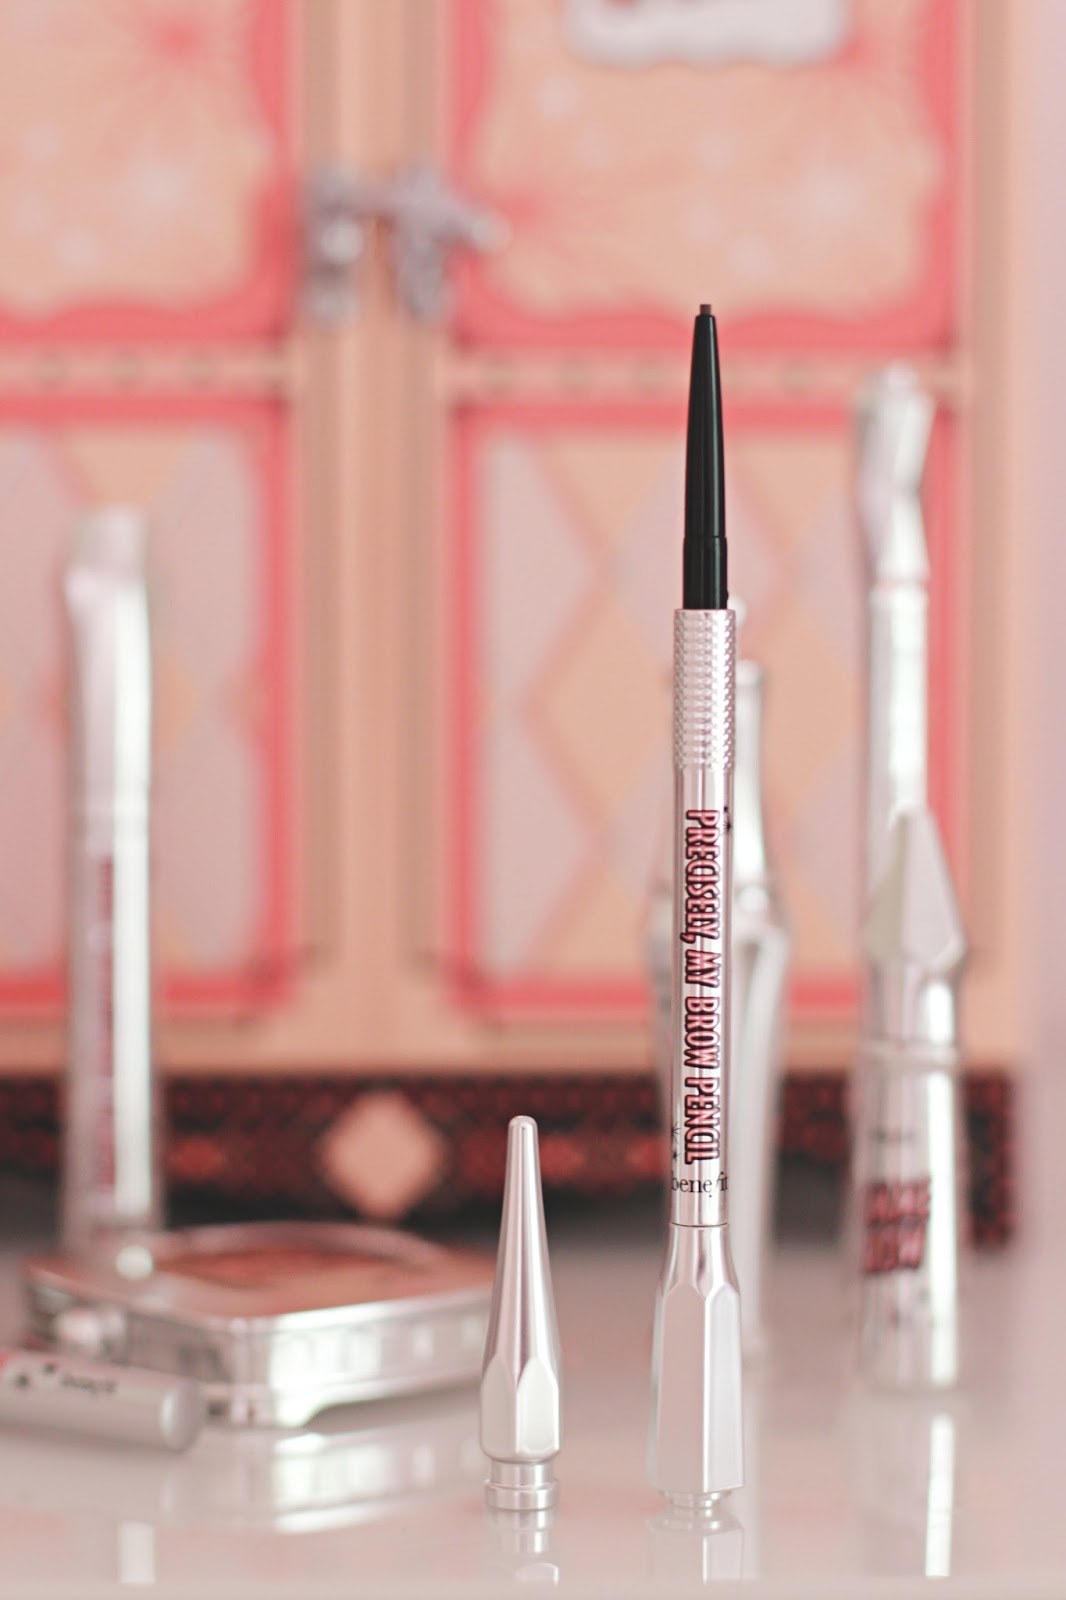 Precisely, My Brow Pencil Benefit